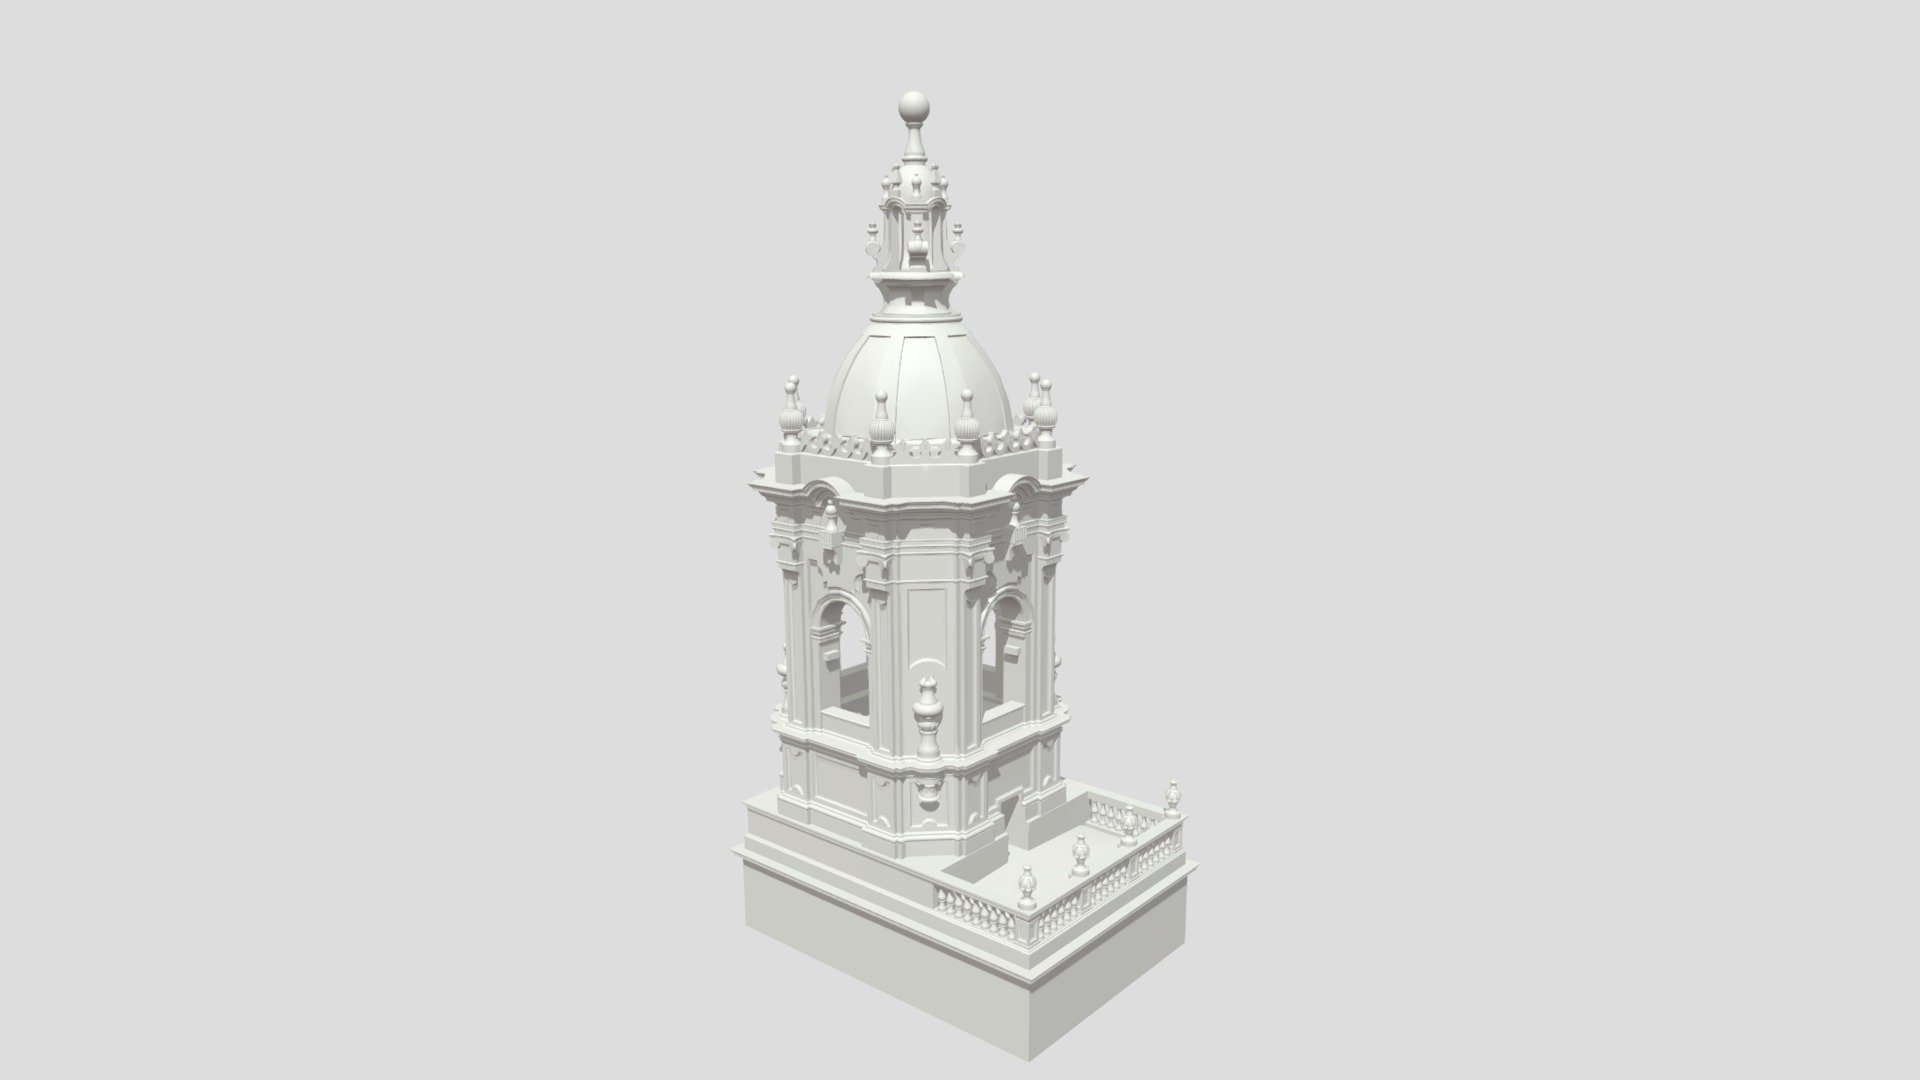 Baroque bell tower built by Francisco de Ibero in 1762 on the old medieval tower of the church of Hondarribia (Gipuzkoa). Model made on the basis of the survey carried out on site, divided into pieces for 3D printing 3d model